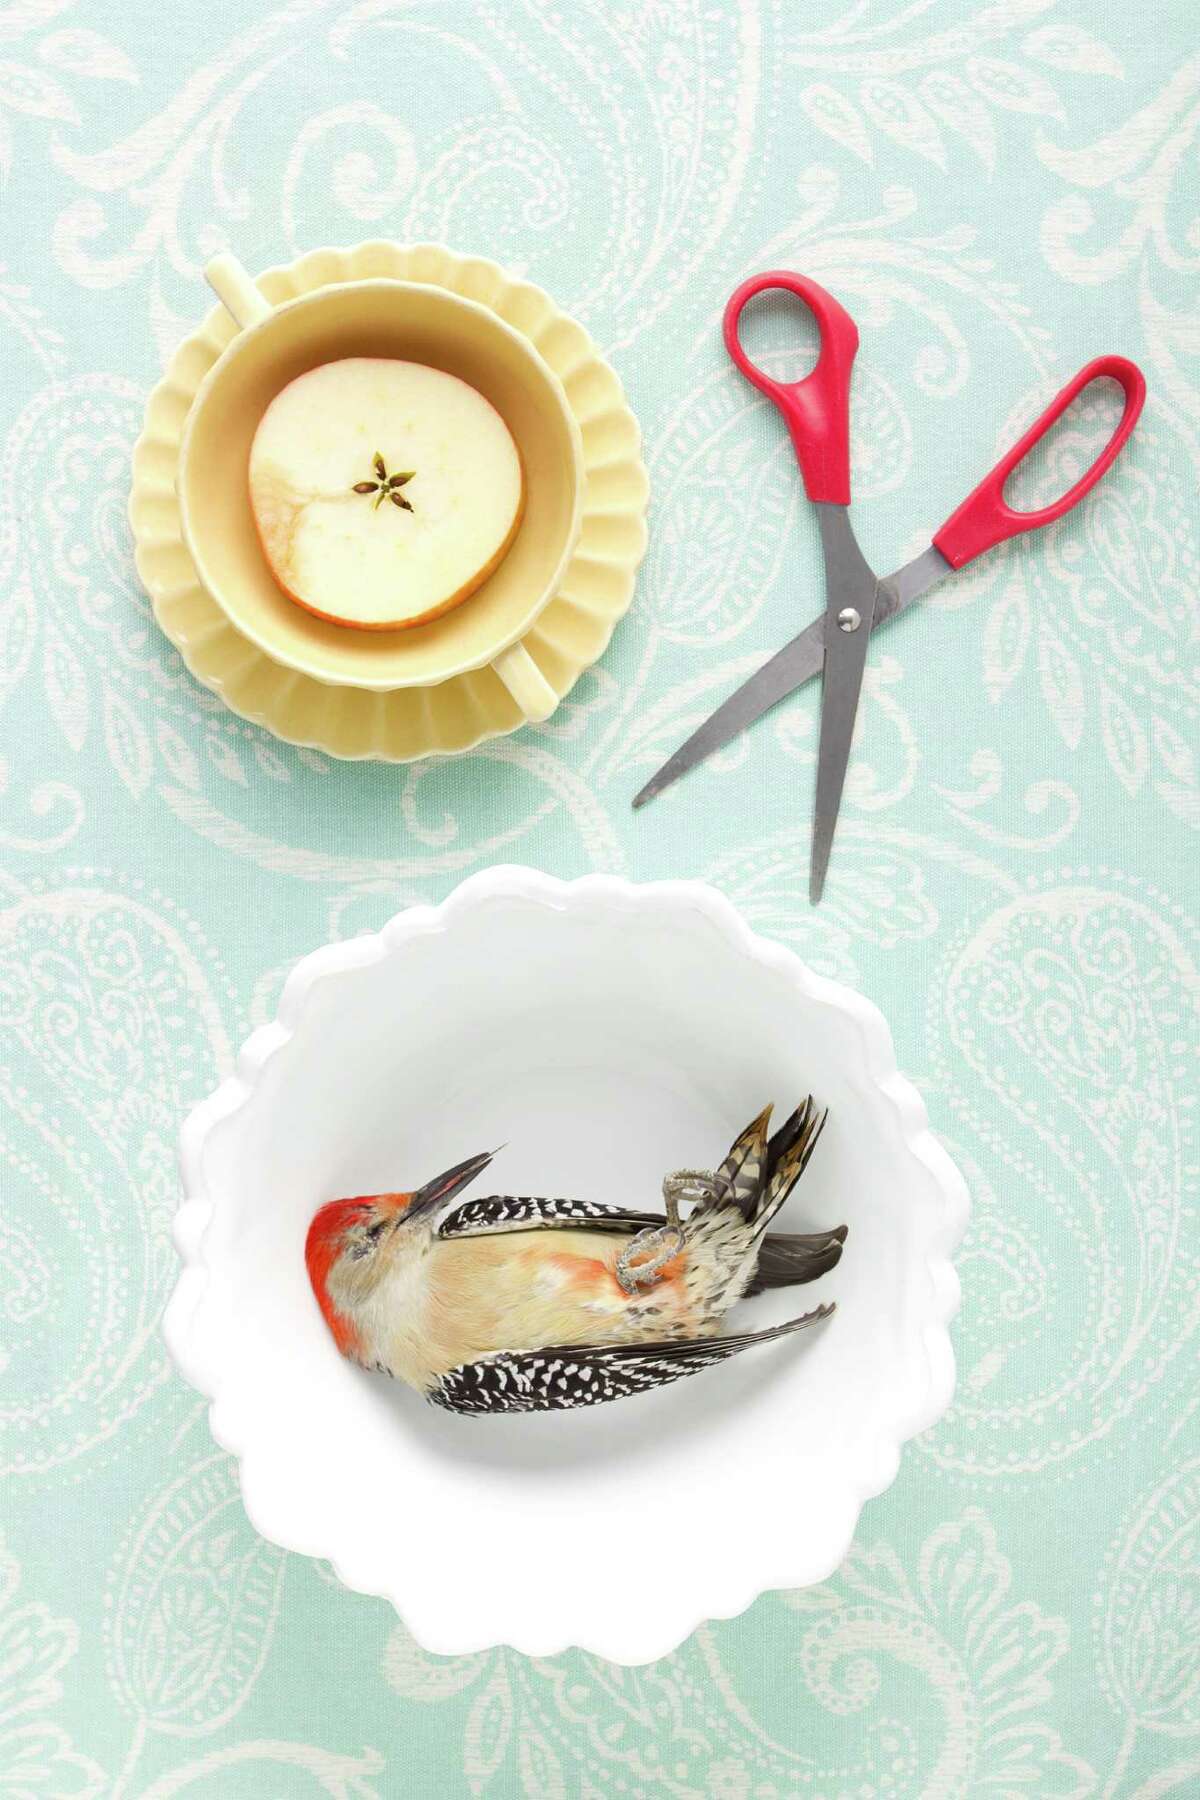 Kimberly Witham, "Still Life with Woodpecker and Scissors" will be exhibited at Collar Works Gallery in ?Gilding the Collapse: Artists of the Billboard Art Project.? (Courtesy Collar Works Gallery)